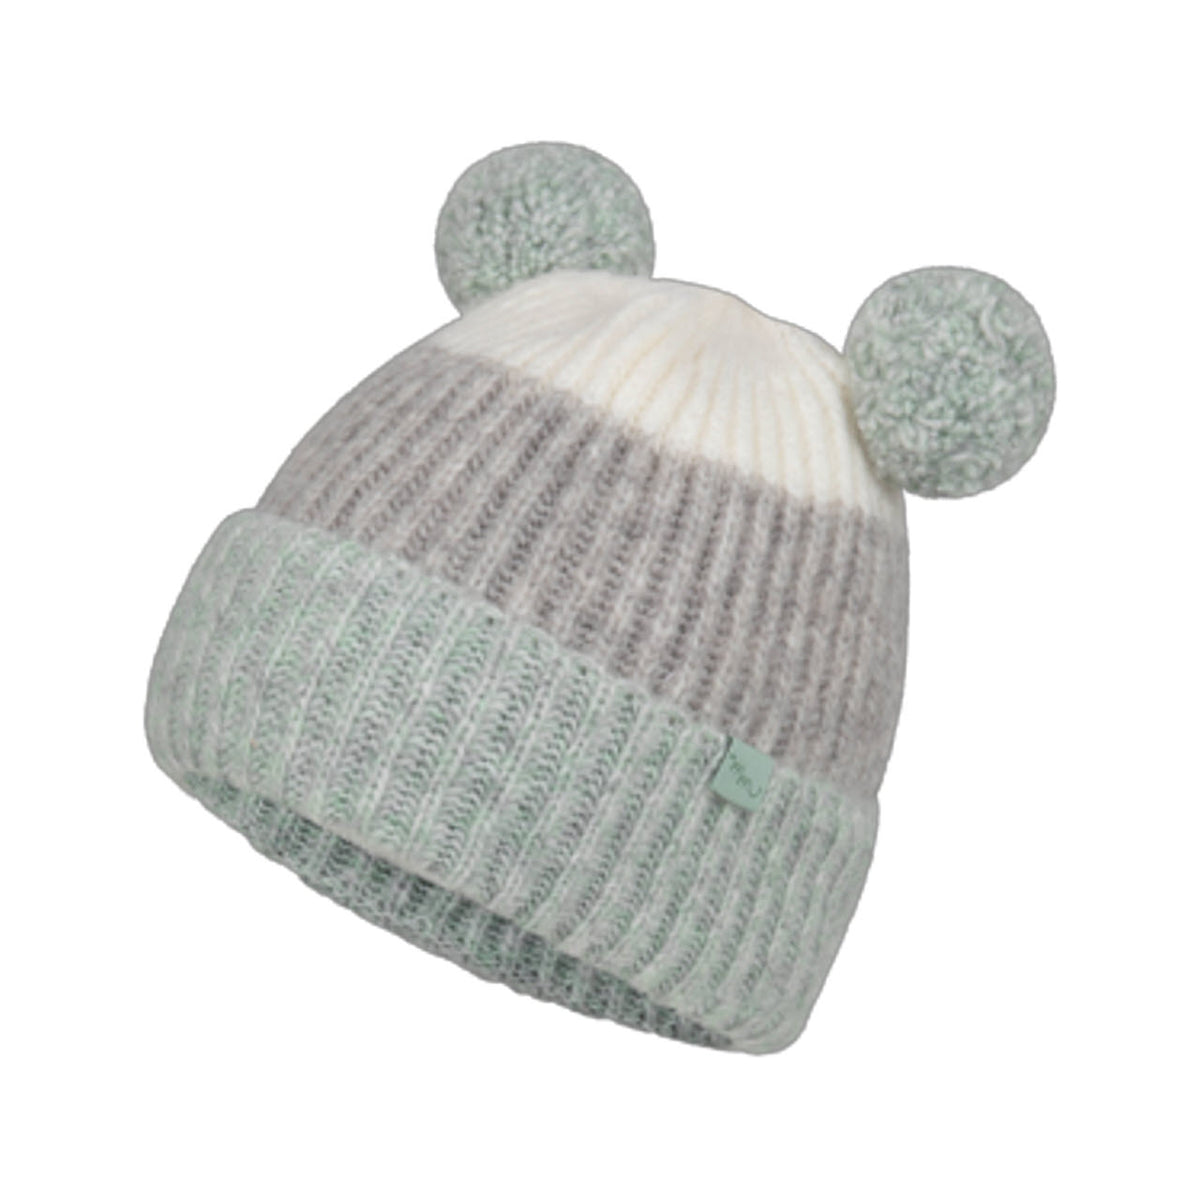 A Millymook Togara beanie in sage green and white, adorned with two pom-poms on top, isolated on a white background.